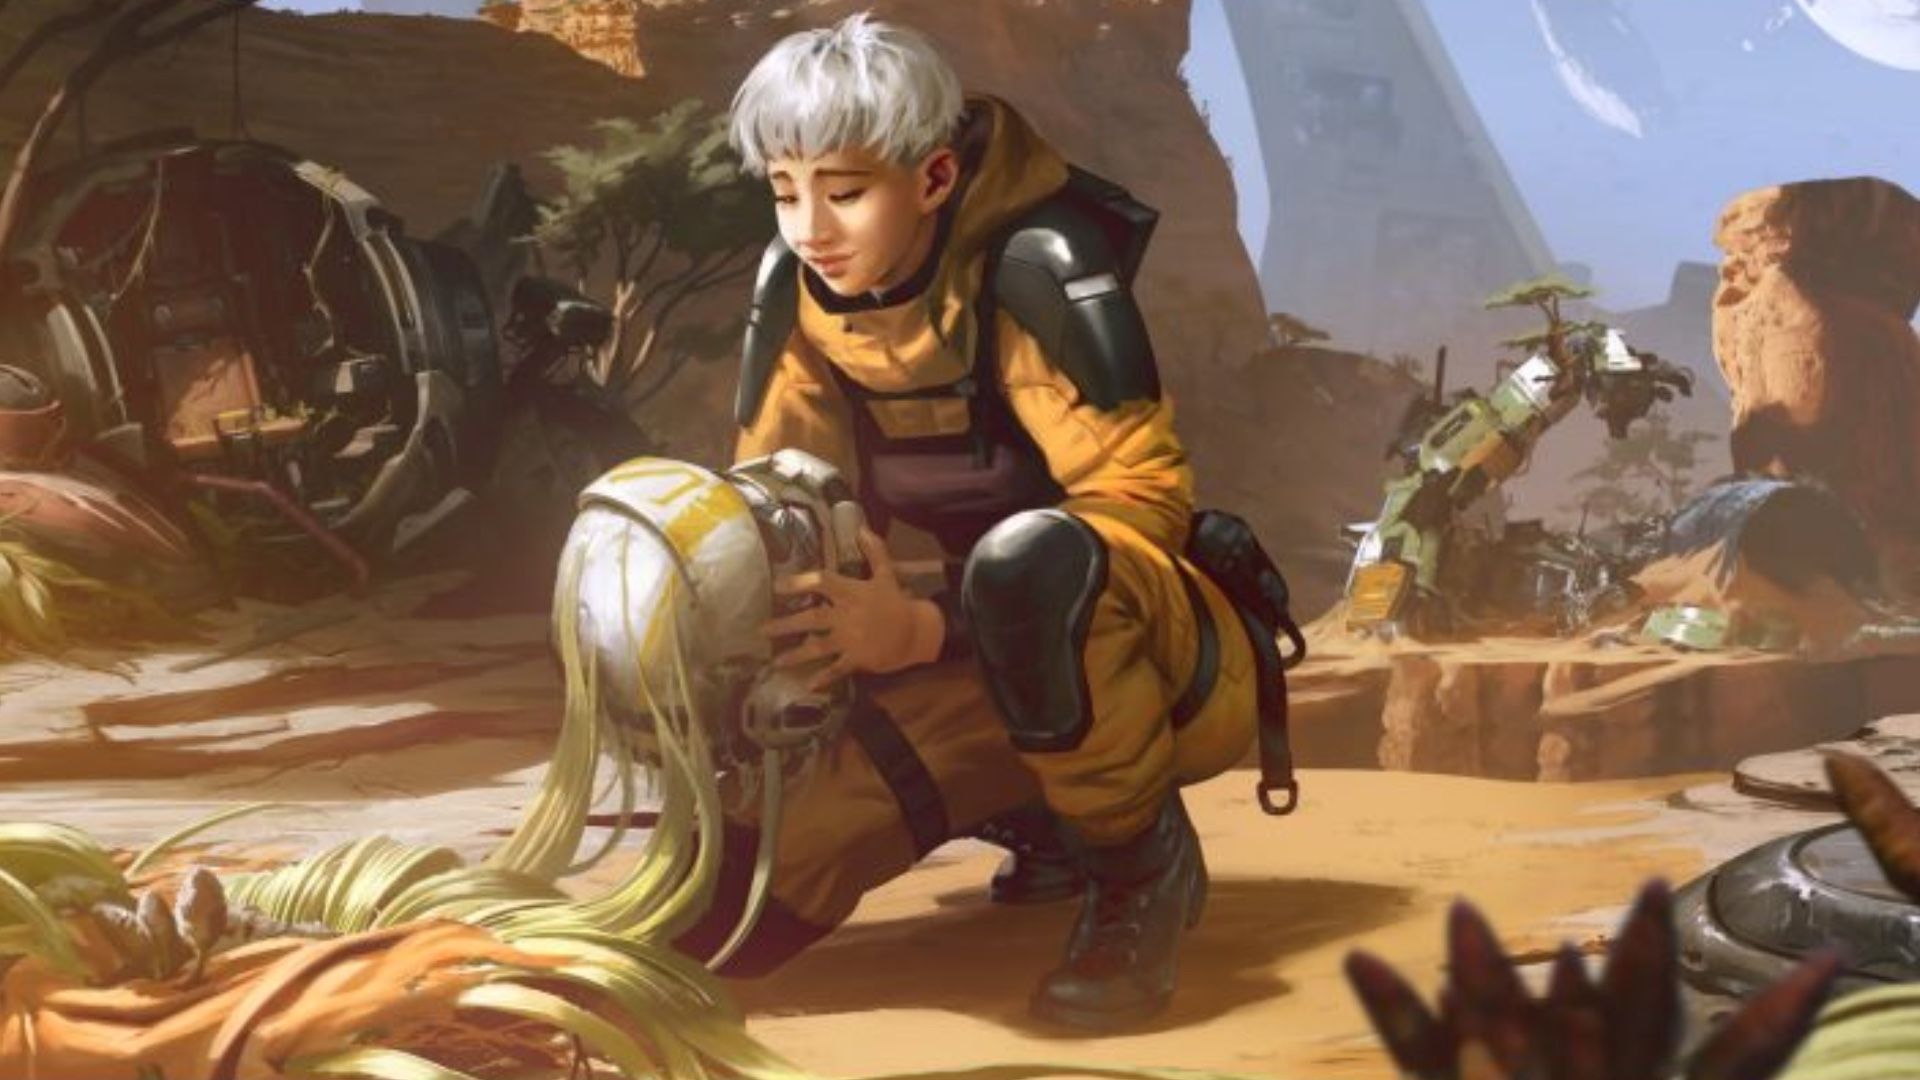 Apex Legends Season 9 Legacy launches with Valkyrie May 4